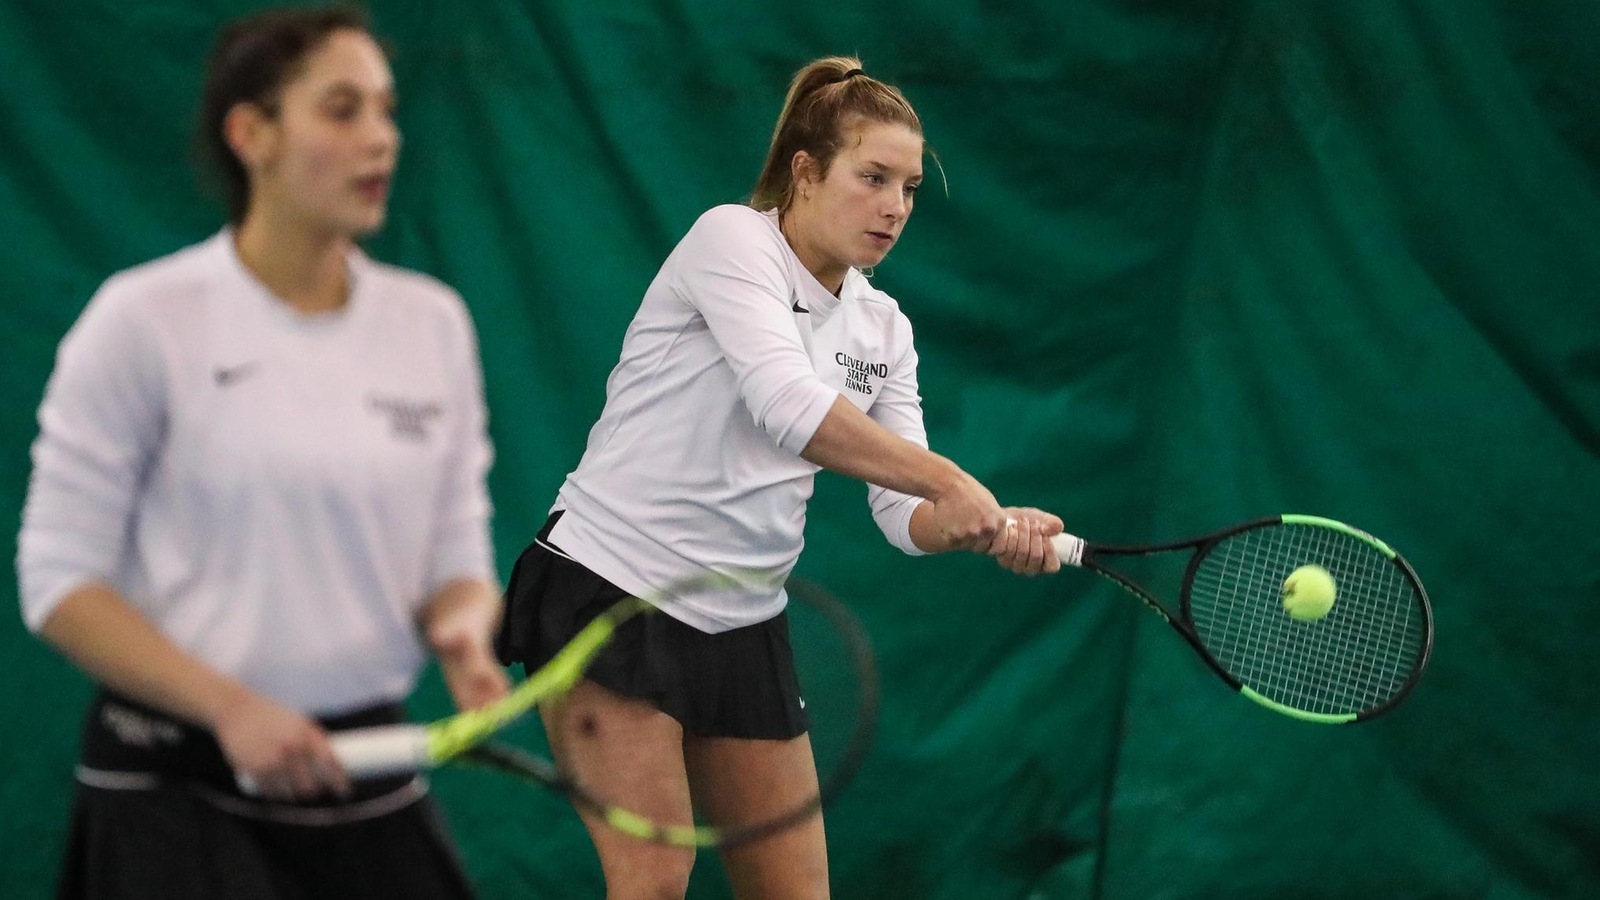 Cleveland State Women’s Tennis Sweeps #HLTennis Weekly Awards For Second Straight Week